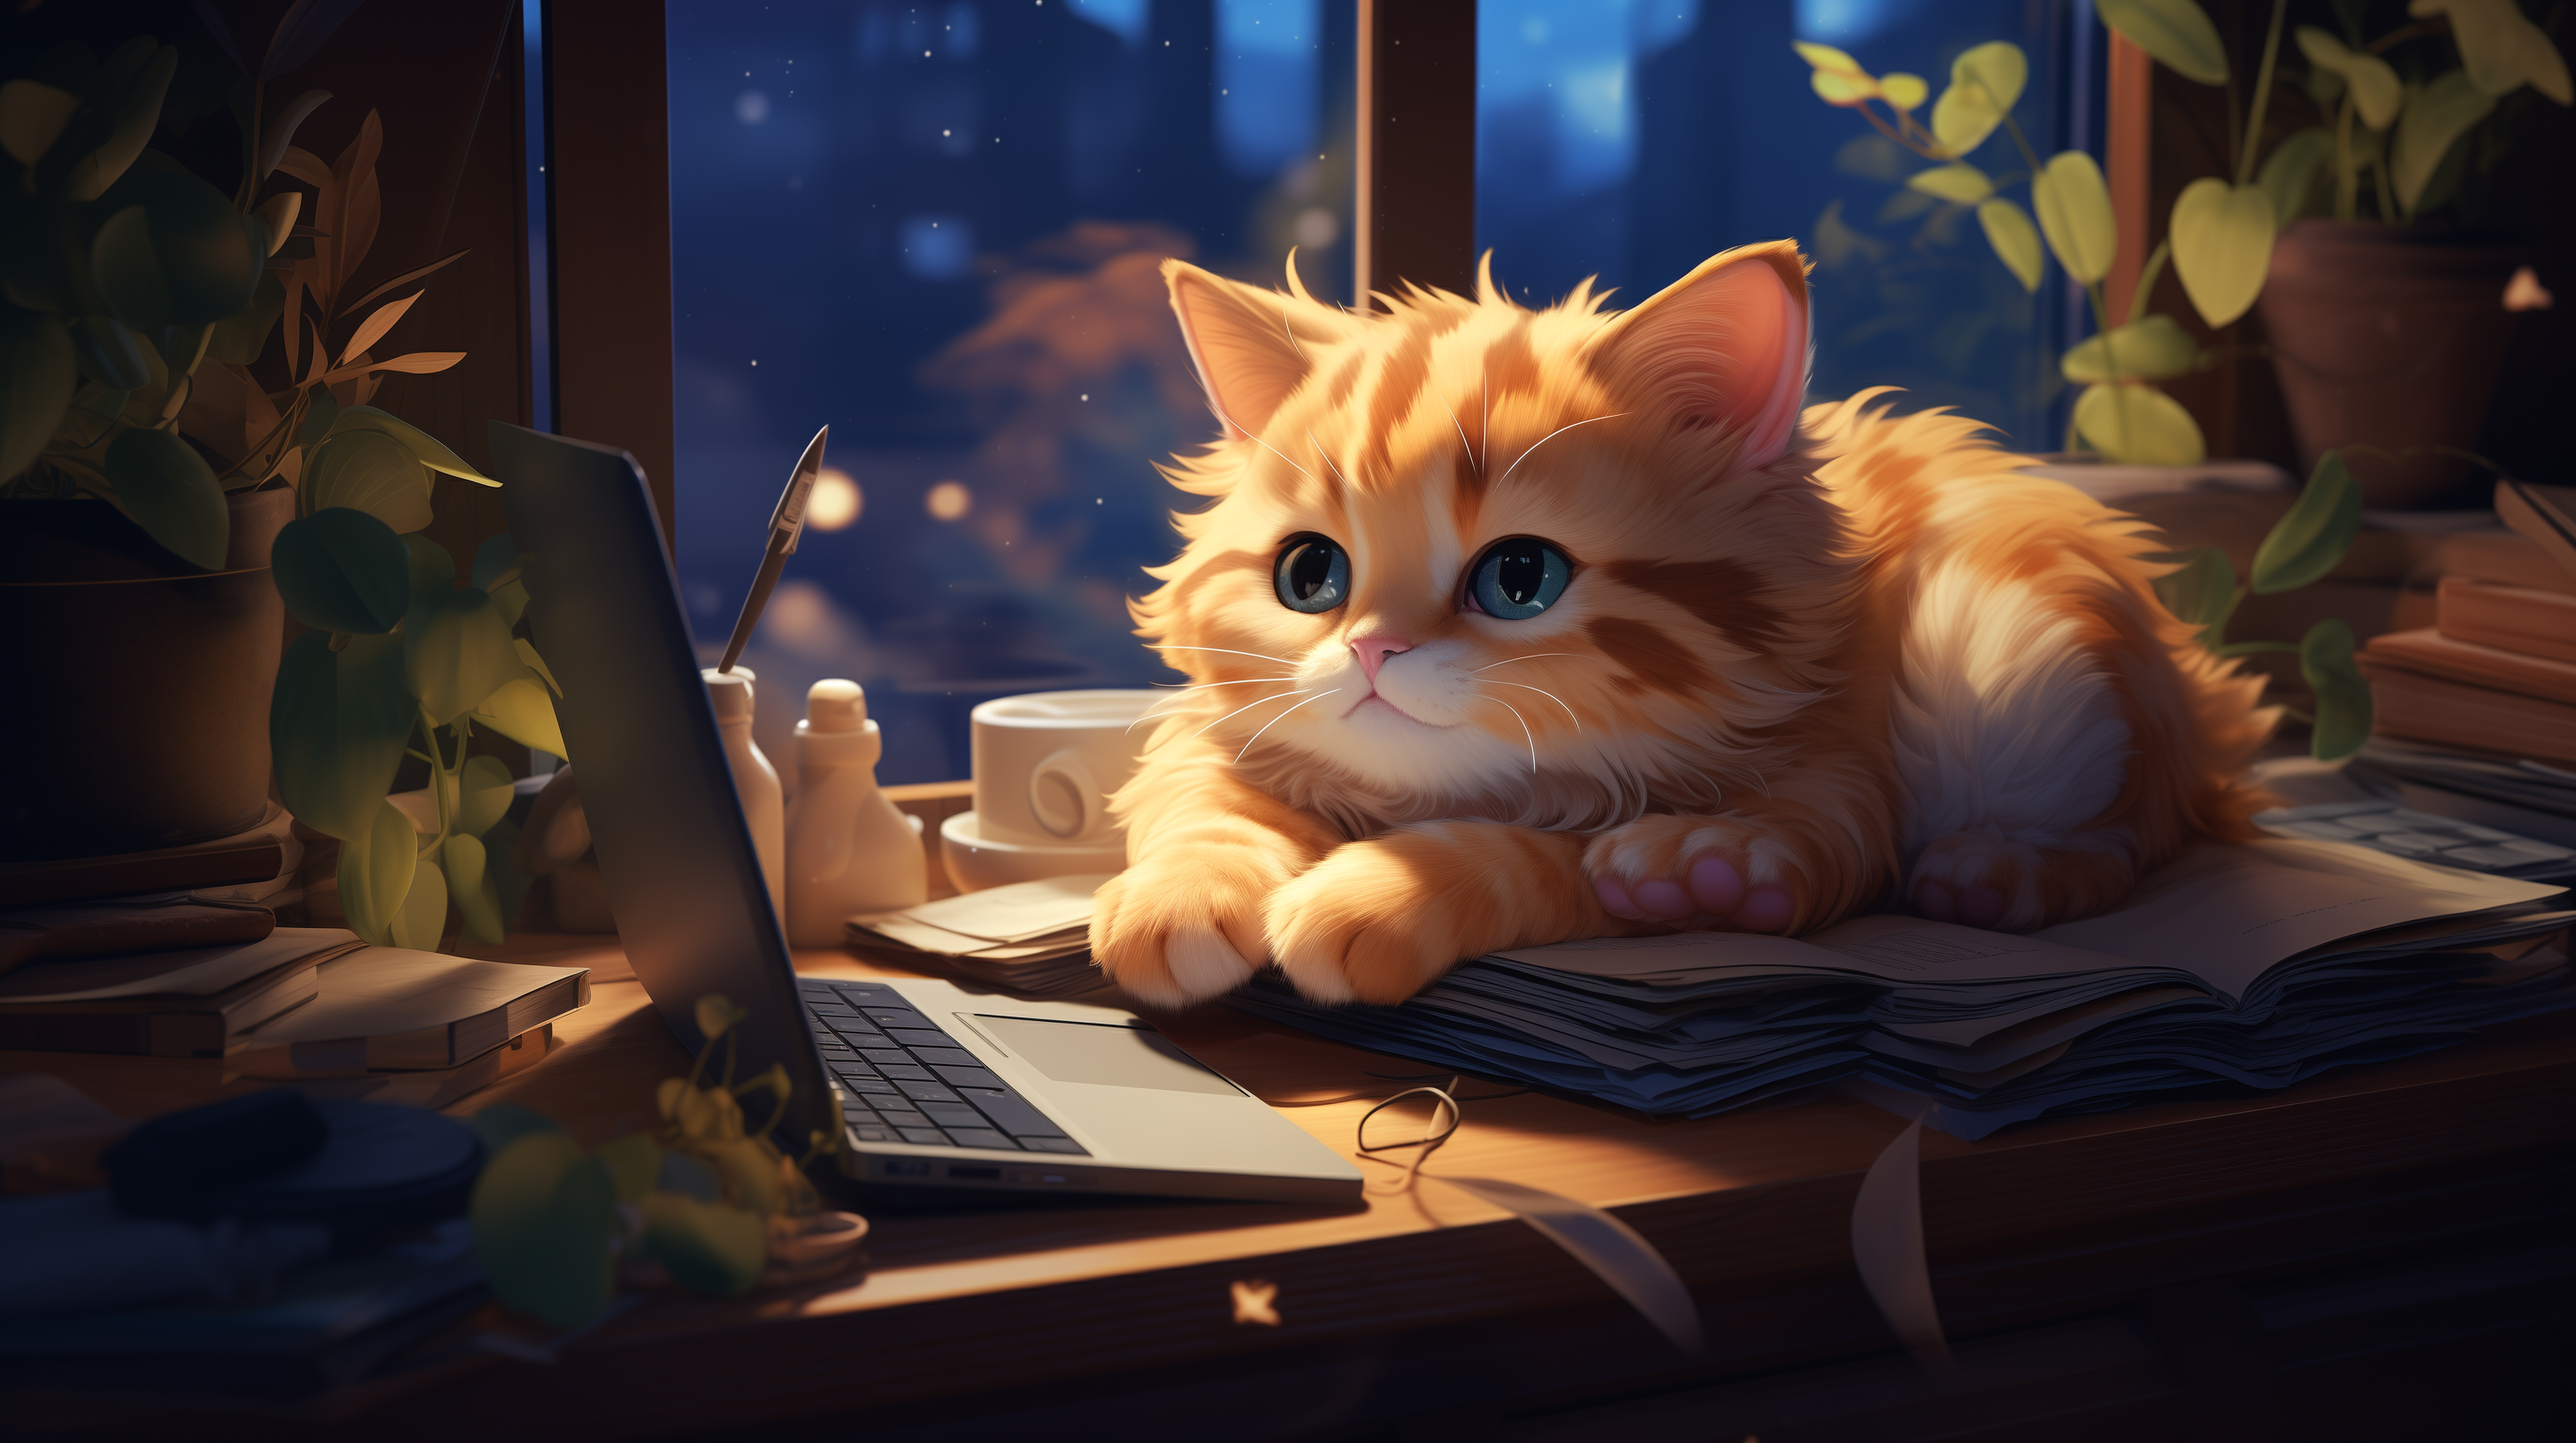  Cute HD Wallpapers and Backgrounds